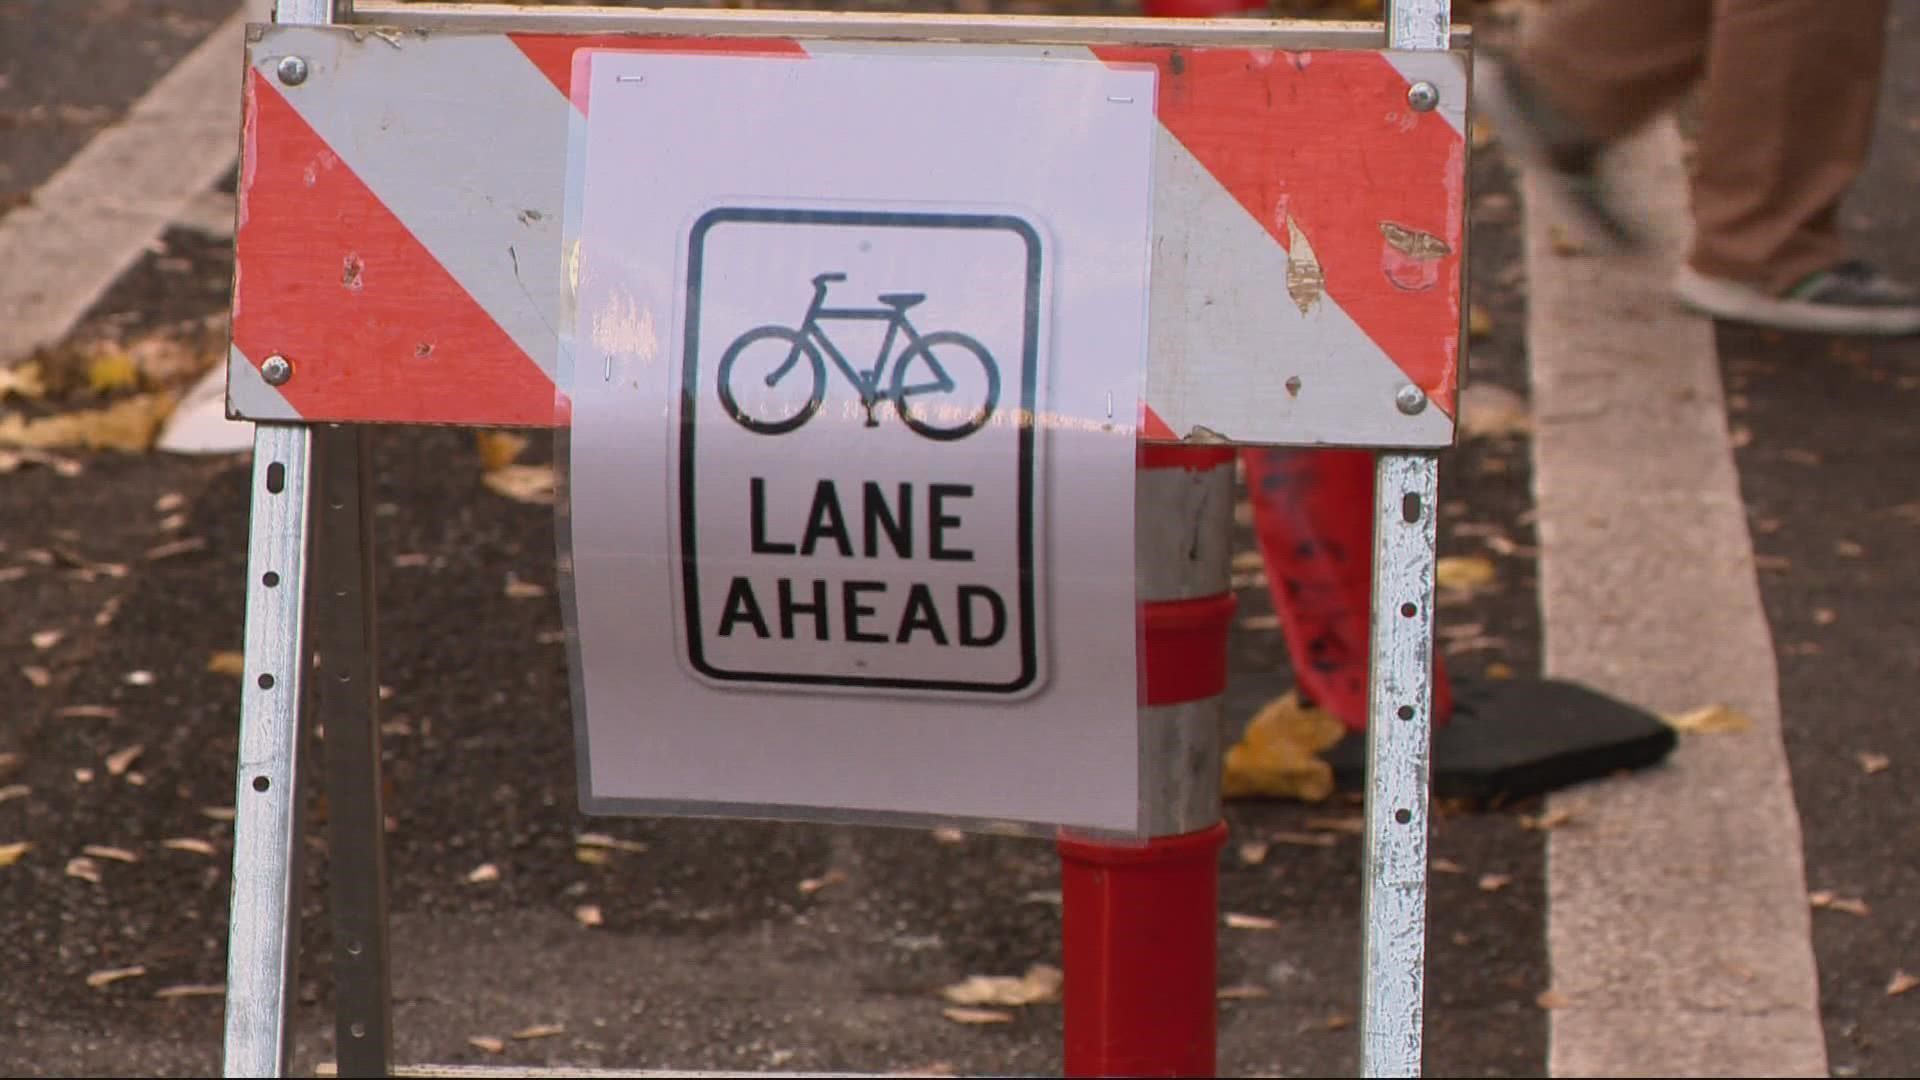 General manager of The Heathman Hotel says there are too many close calls between cyclists and pedestrians.